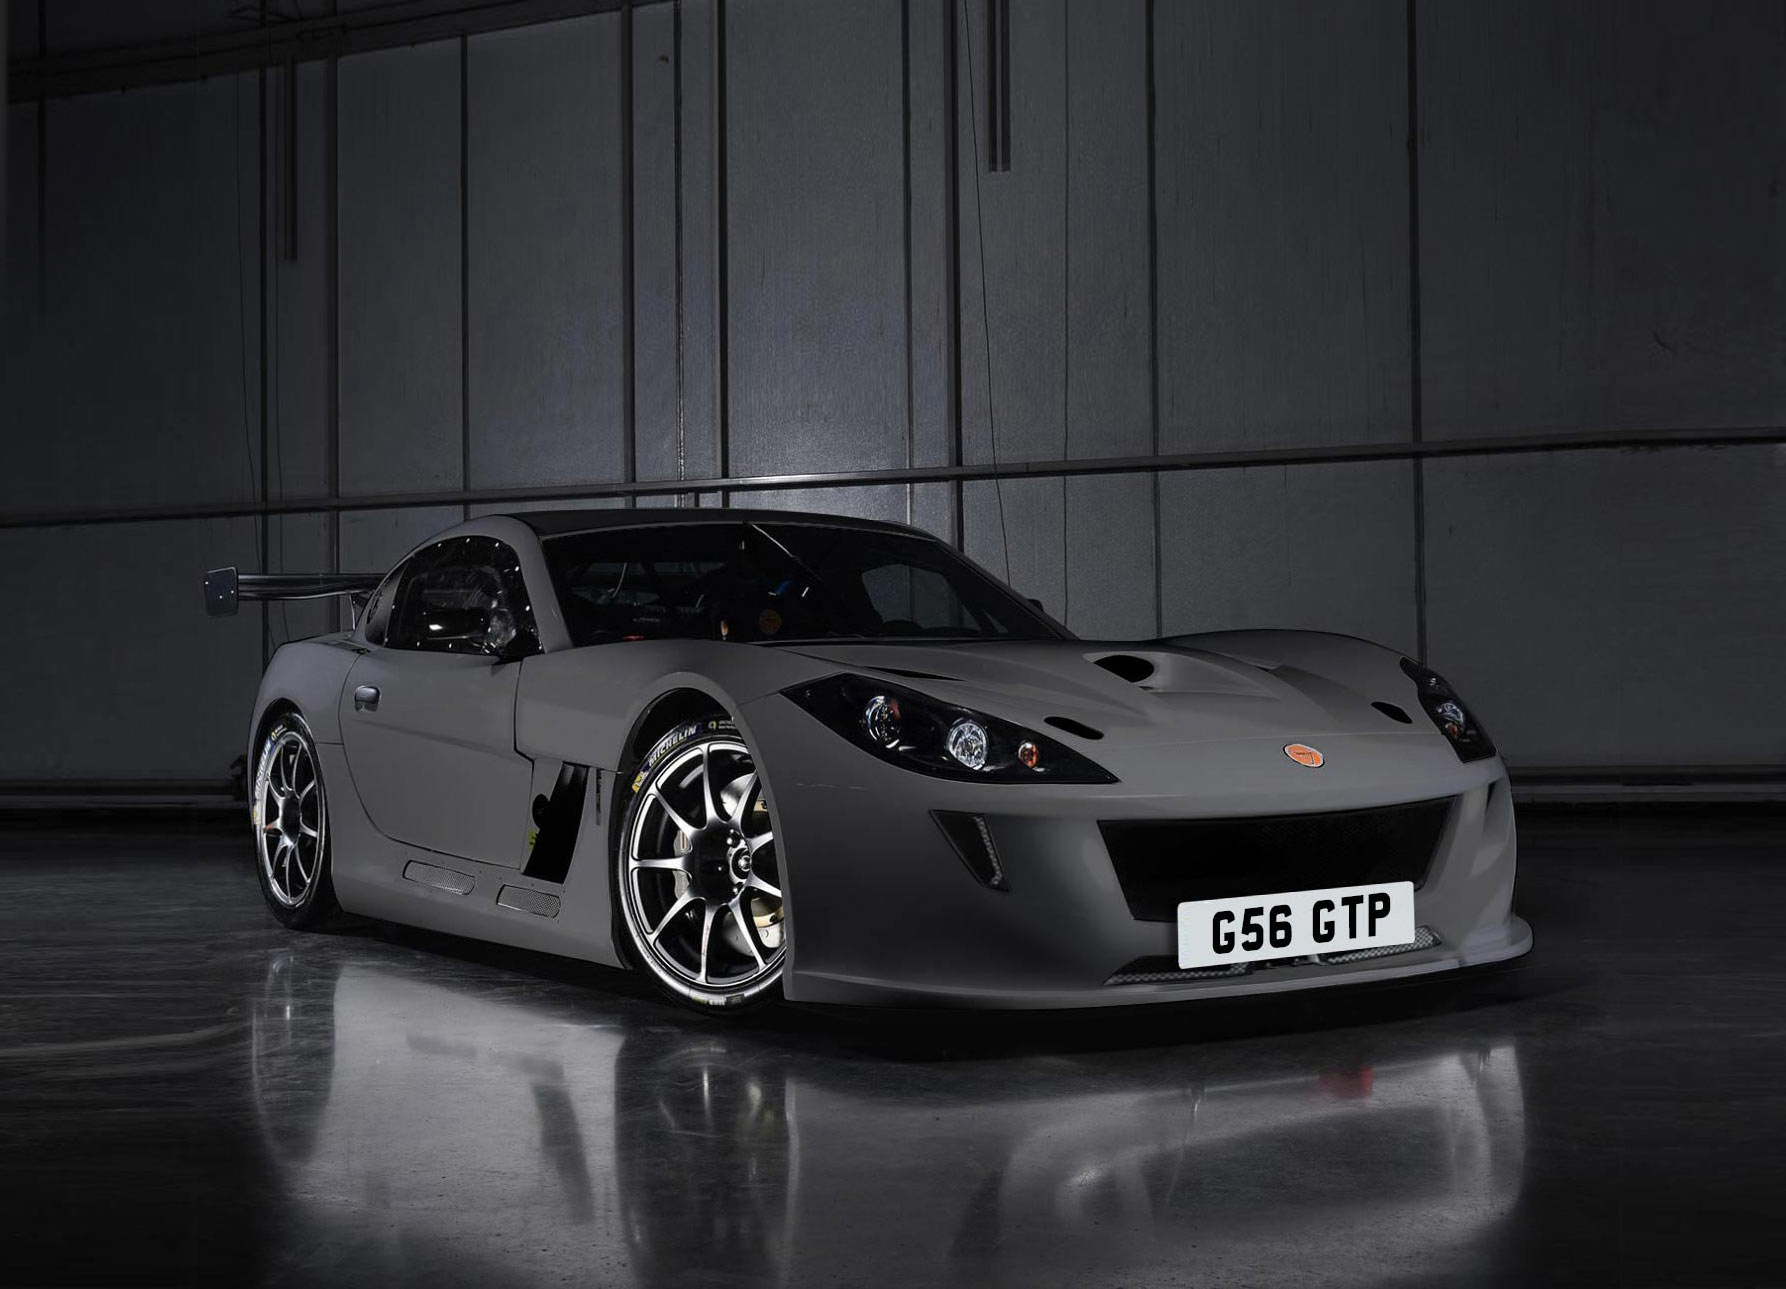 Ginetta G56 GT Pro Race Car | GT Racing and Track Days